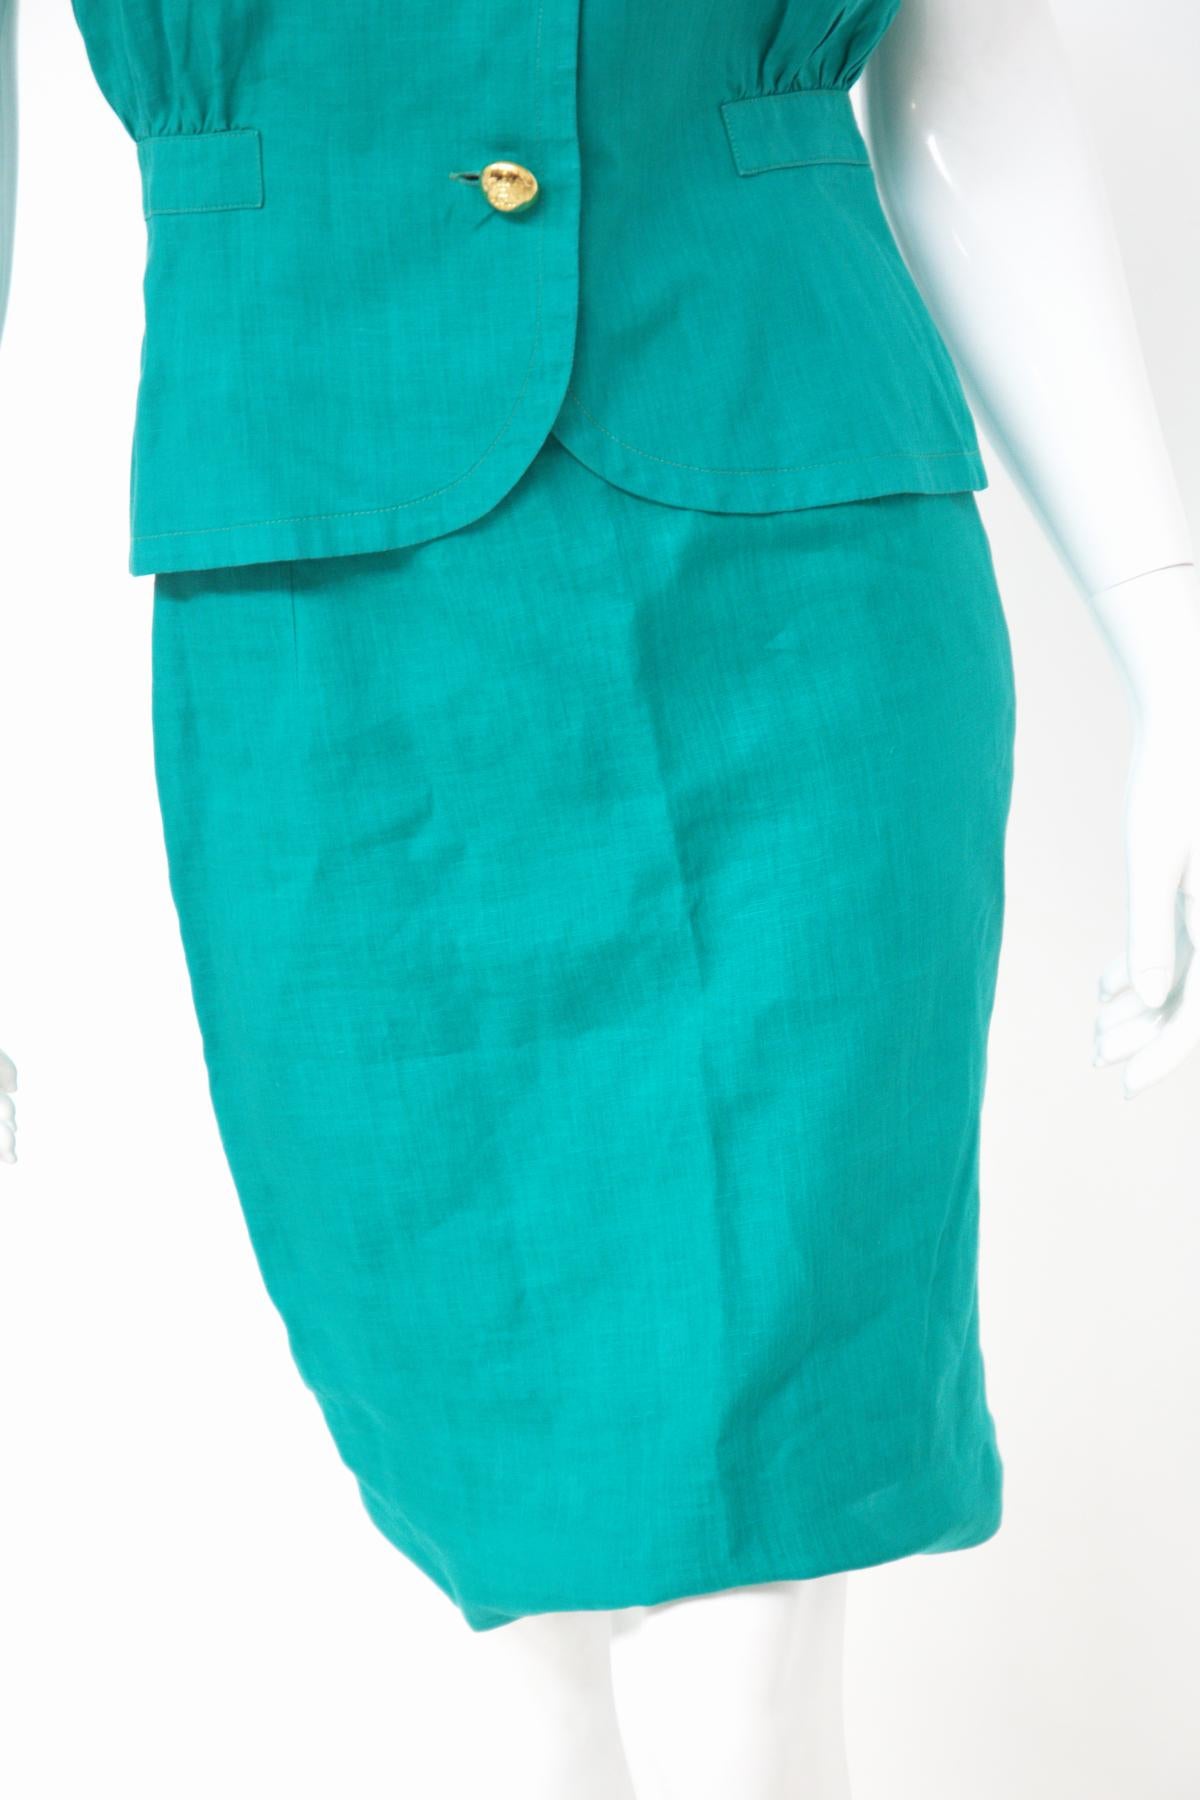 Valentino Miss V Turquoise Linen Skirt Suits 3